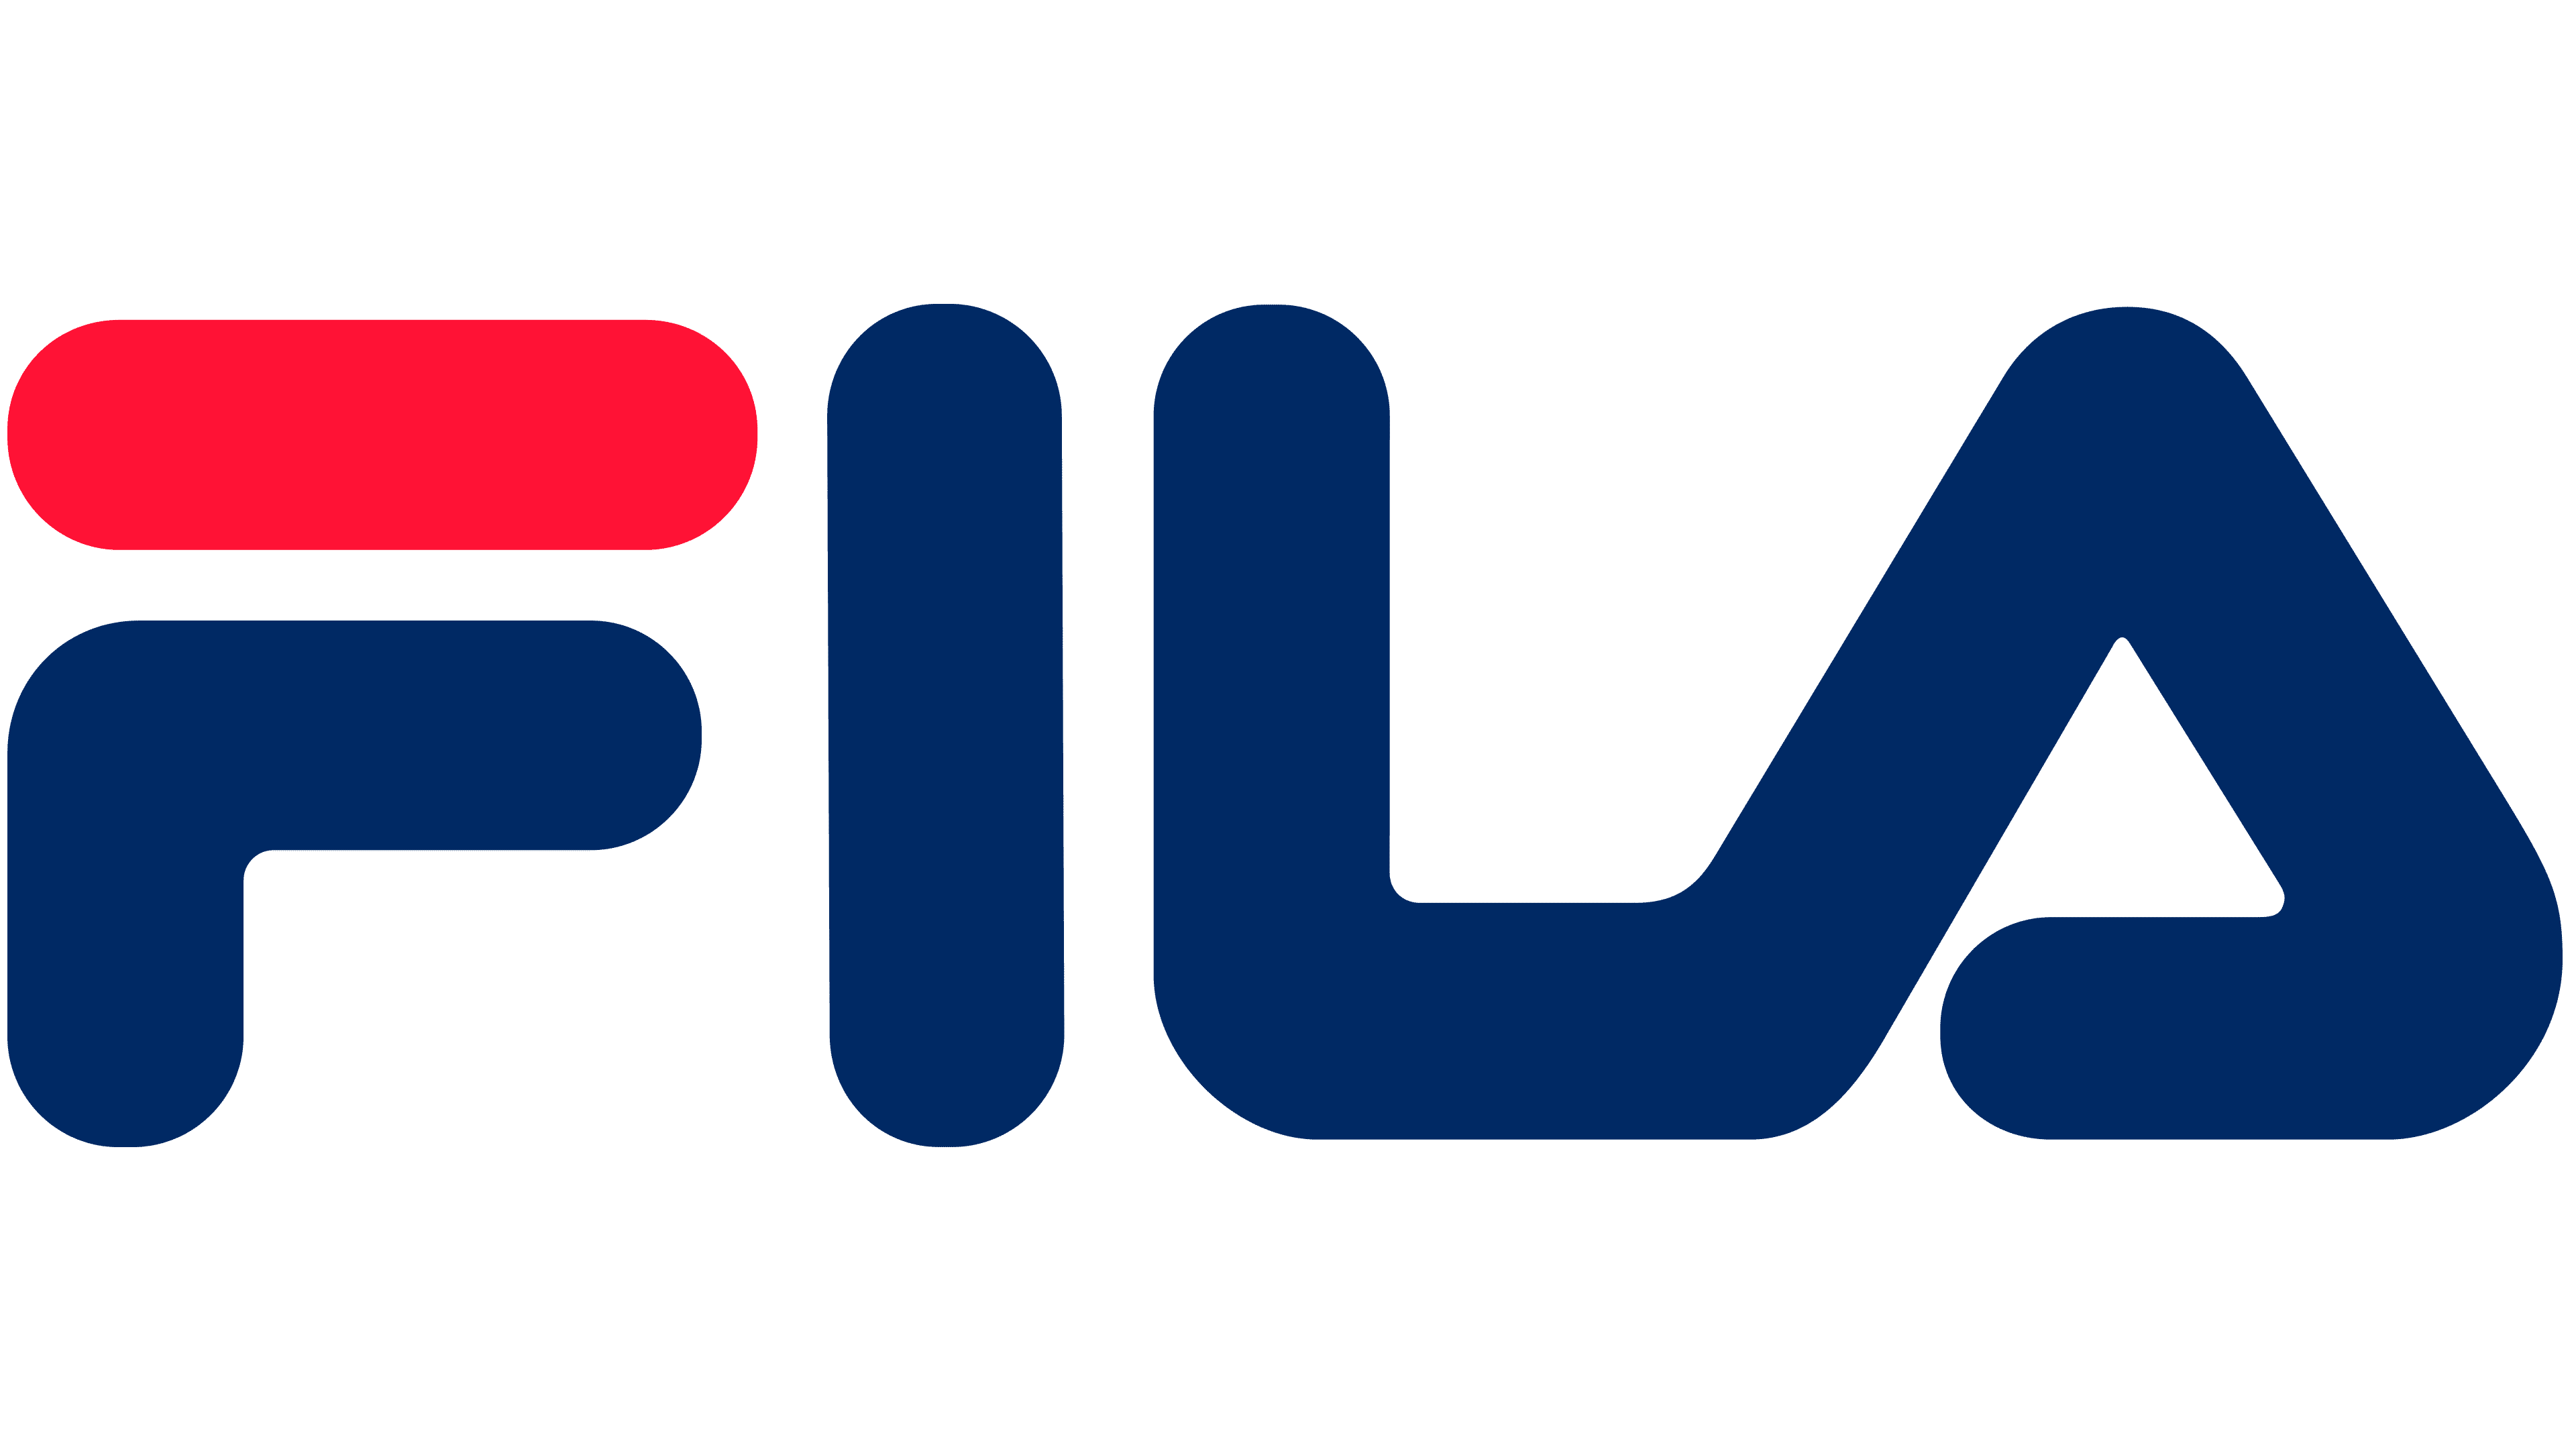 fila logo, symbol, meaning, history, png, brand